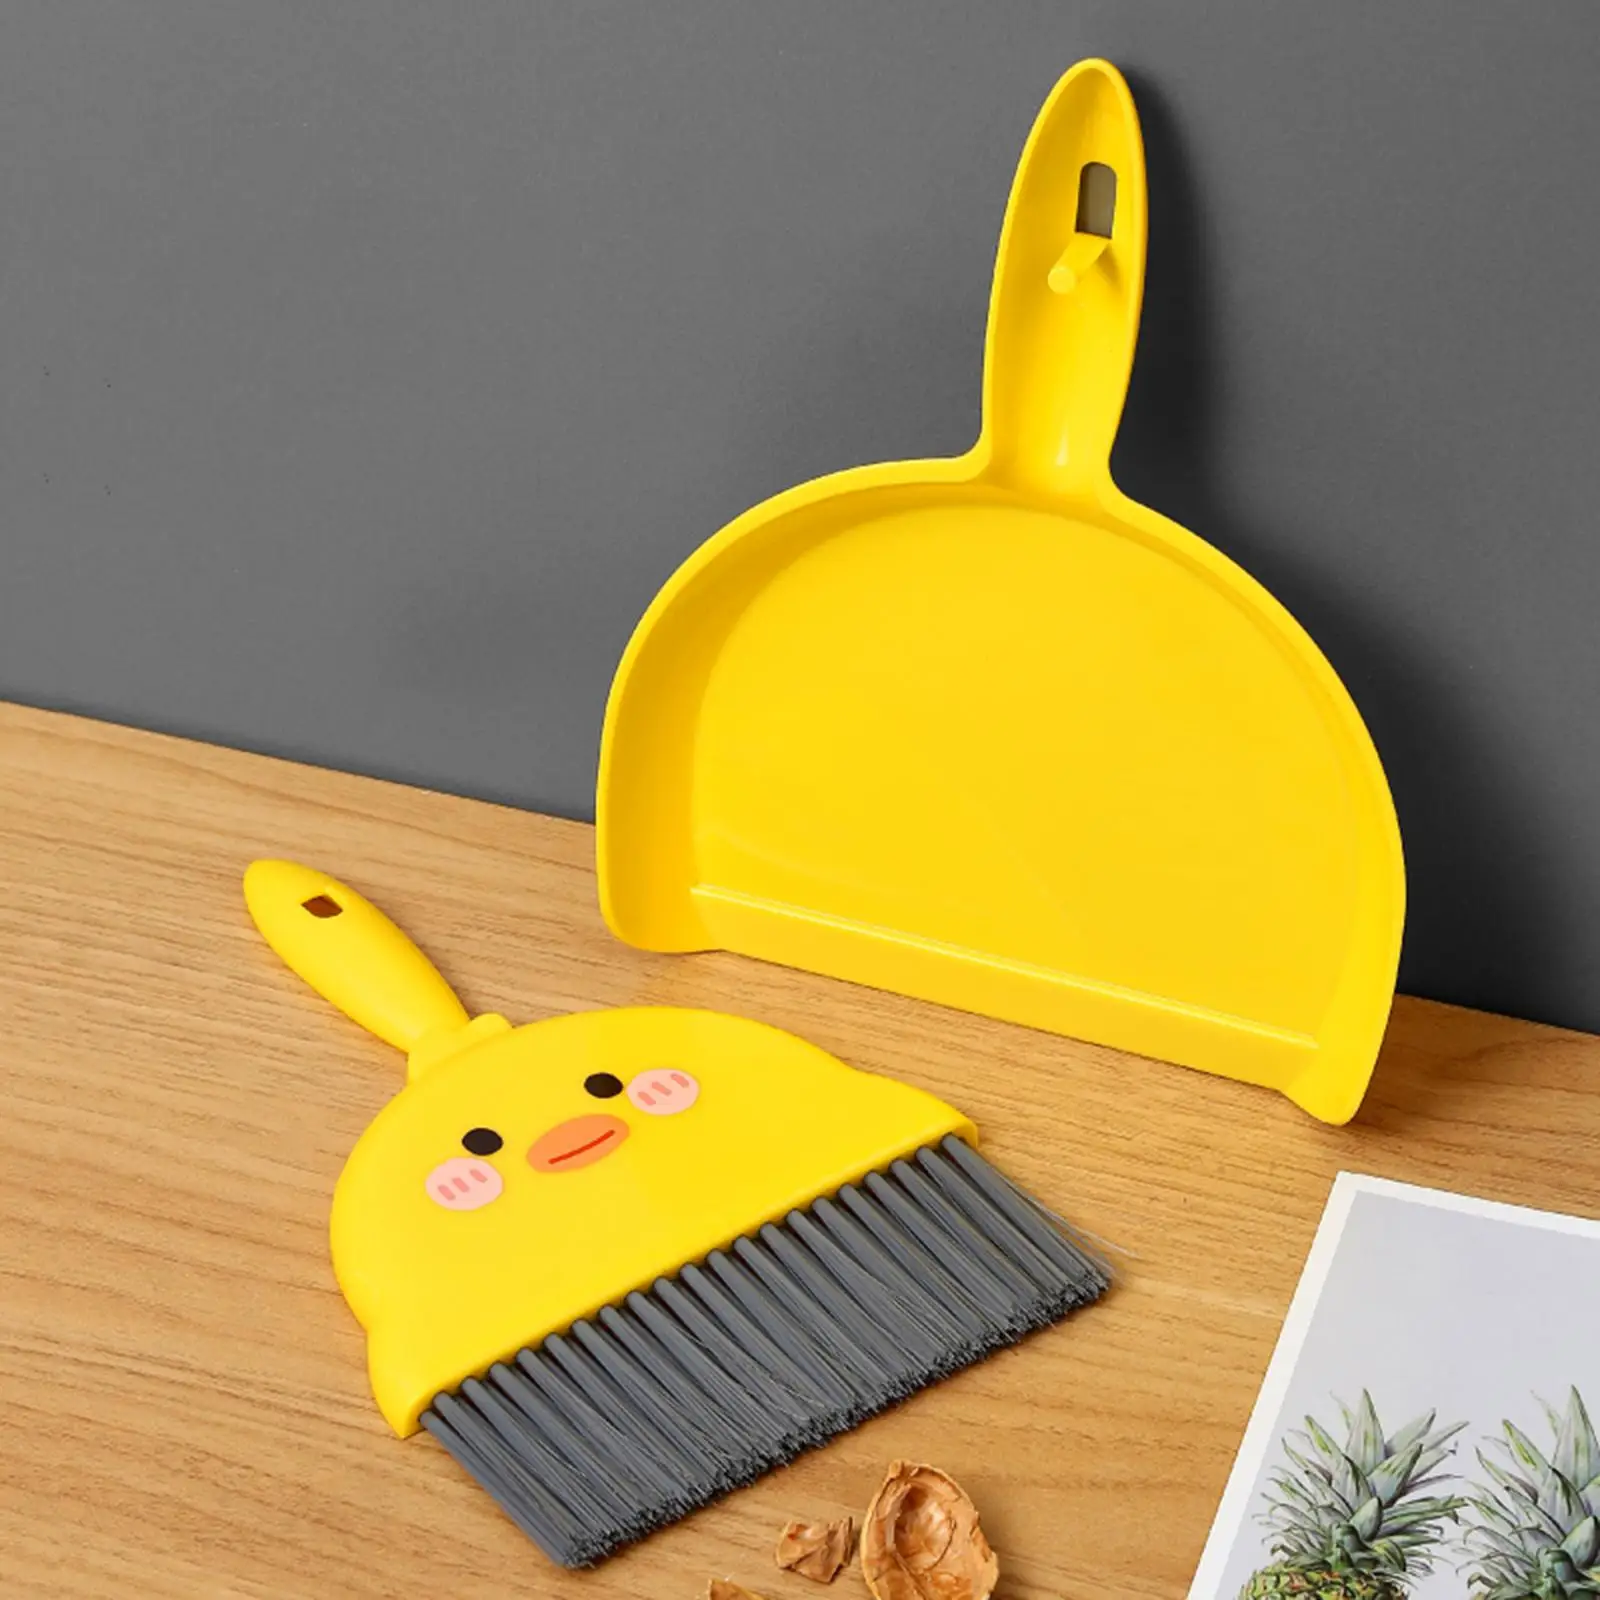 Mini Broom and Dustpan Set Desktop Pretend Play Toy for for Little Housekeeping Helper Sets Gift for Home Bedroom Living Room